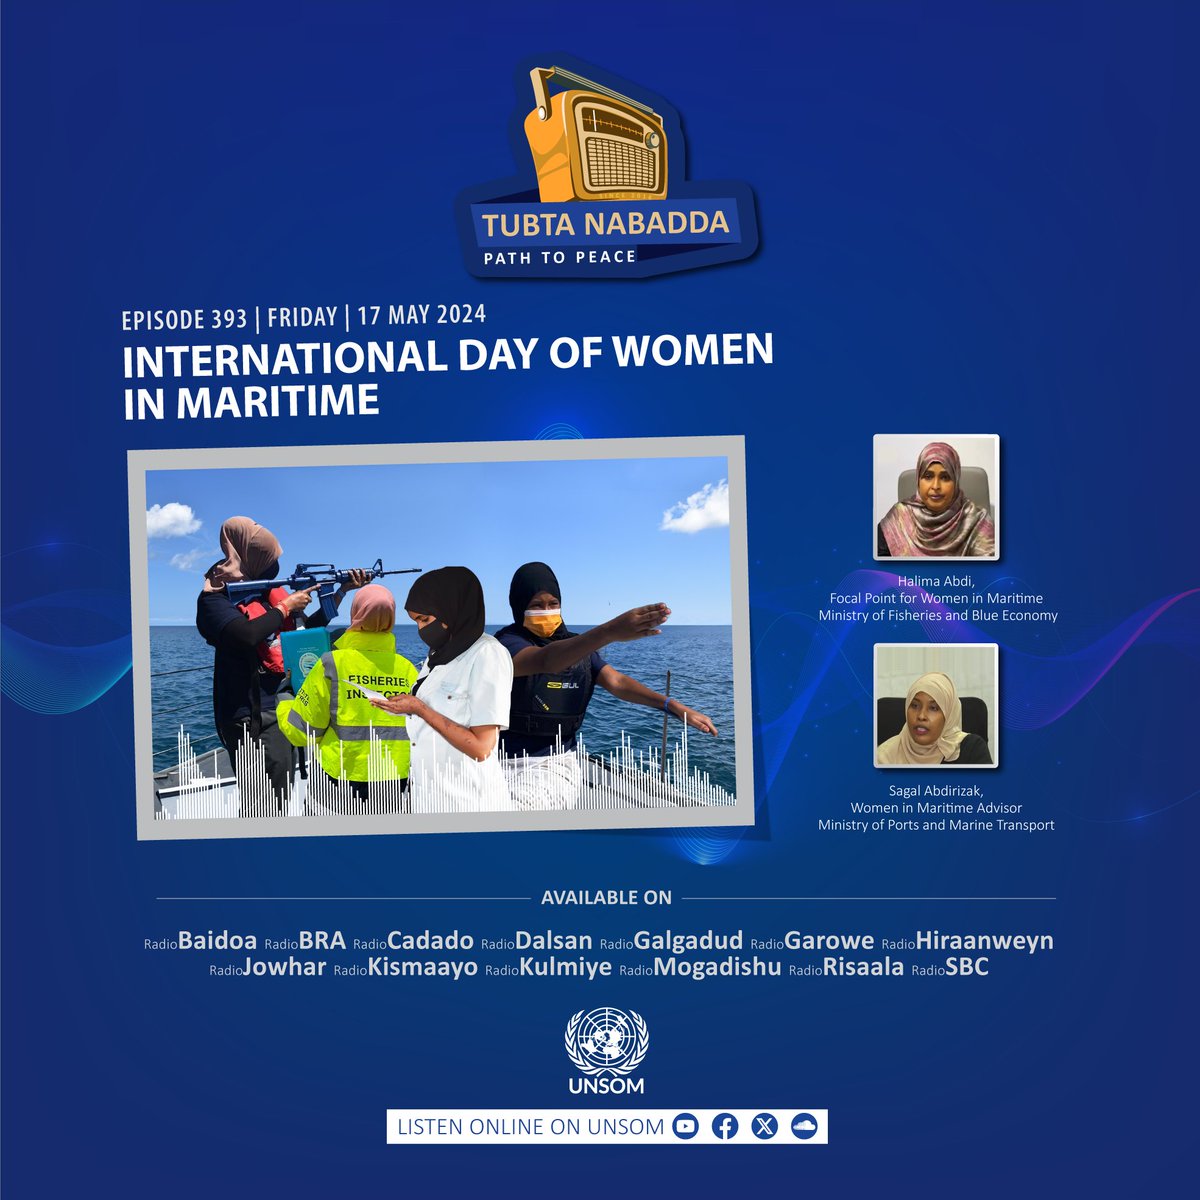 This week on #TubtaNabadda: Ahead of the International Day for Women in Maritime, join @MFBESomalia's Halima Abdi and @MOP_Somalia's Sagal Abdirizak as they highlight the need for empowering #women to utilise the full potential of the ‘blue economy’ for #Somalia's development.